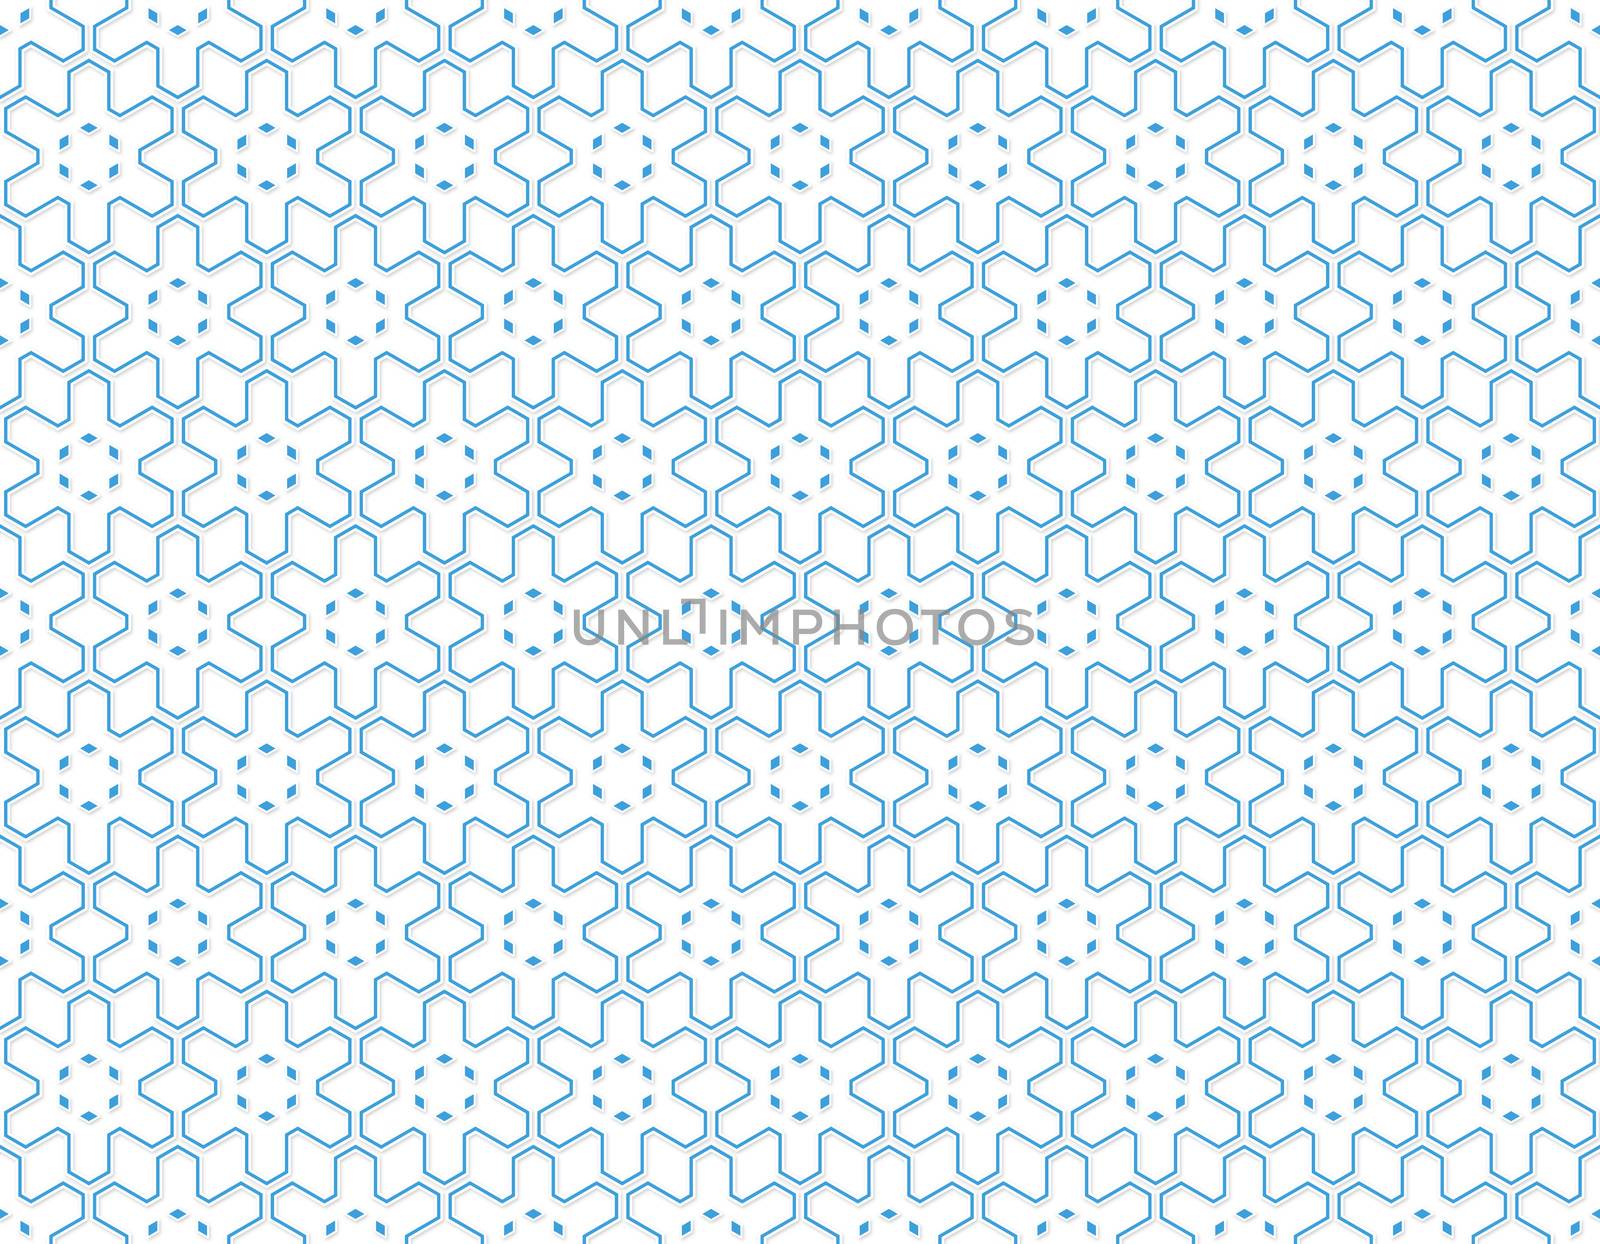 background or paper winter pattern for six shoulder snowflakes